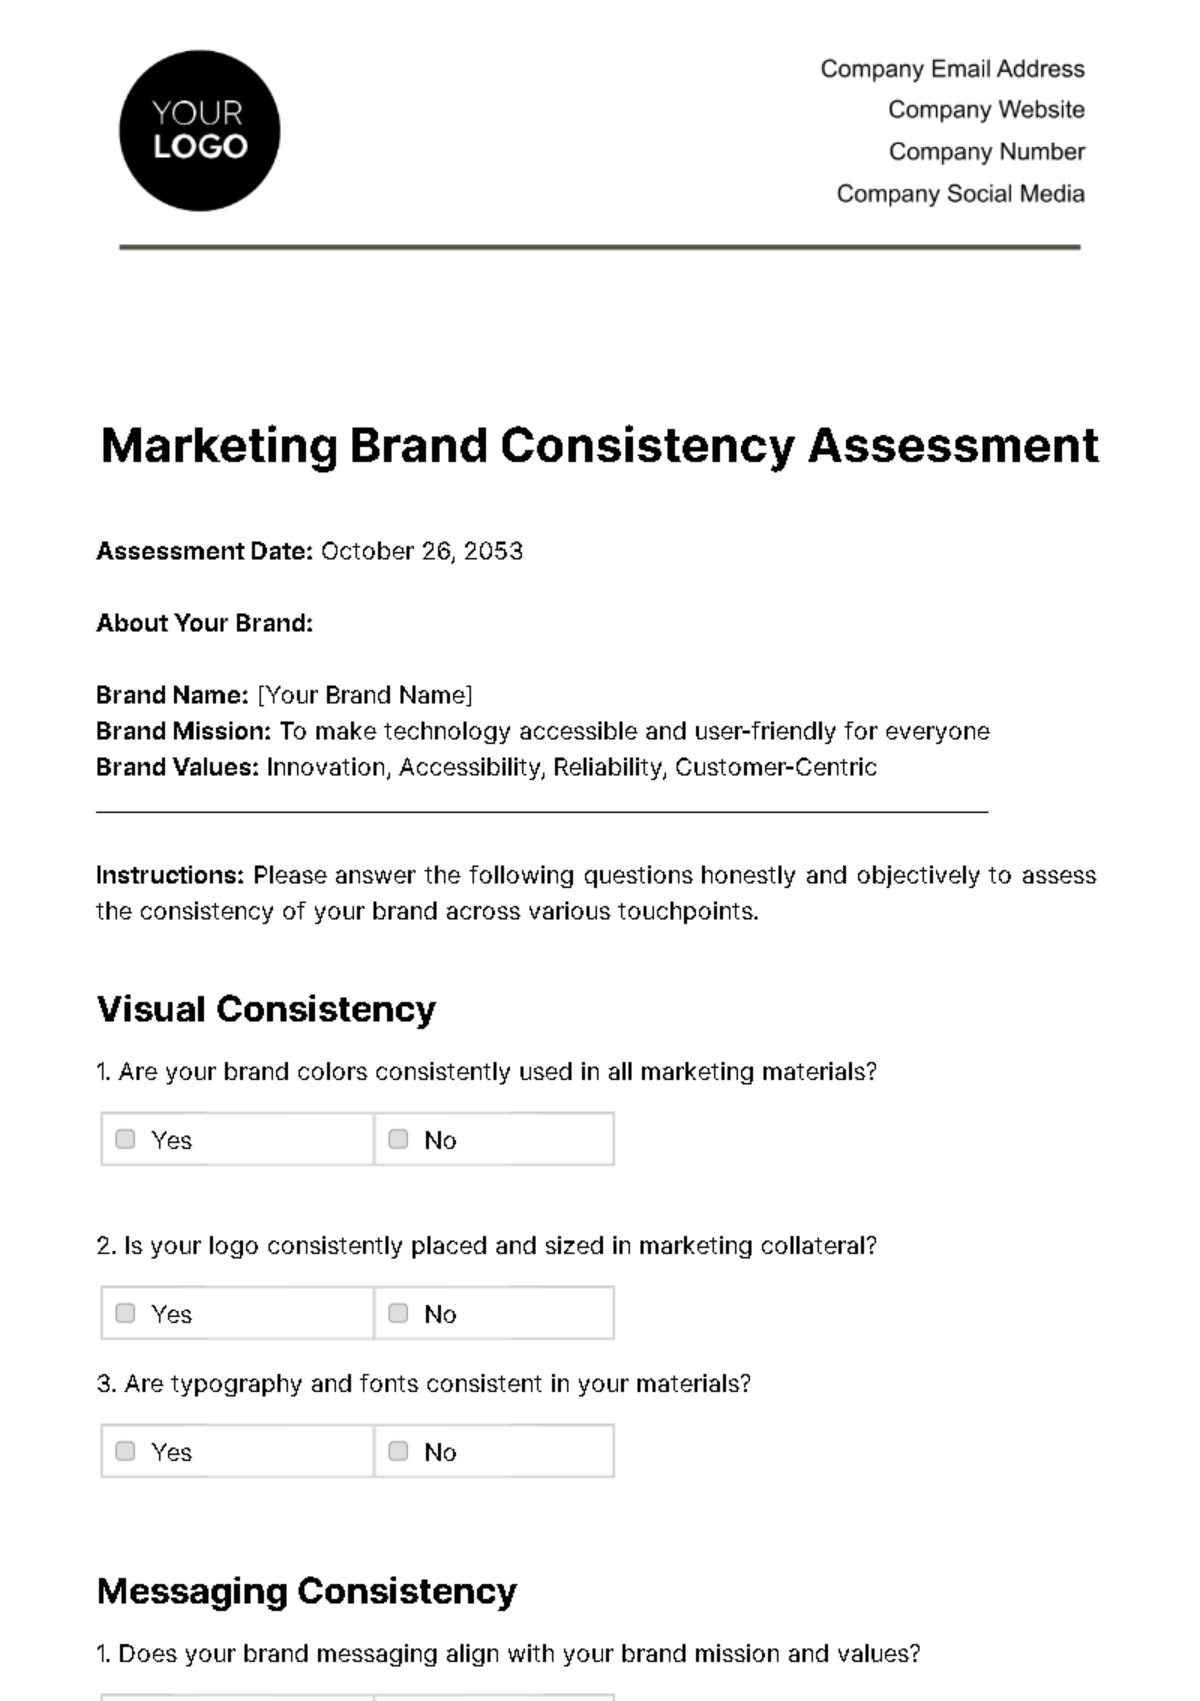 Marketing Brand Consistency Assessment Template